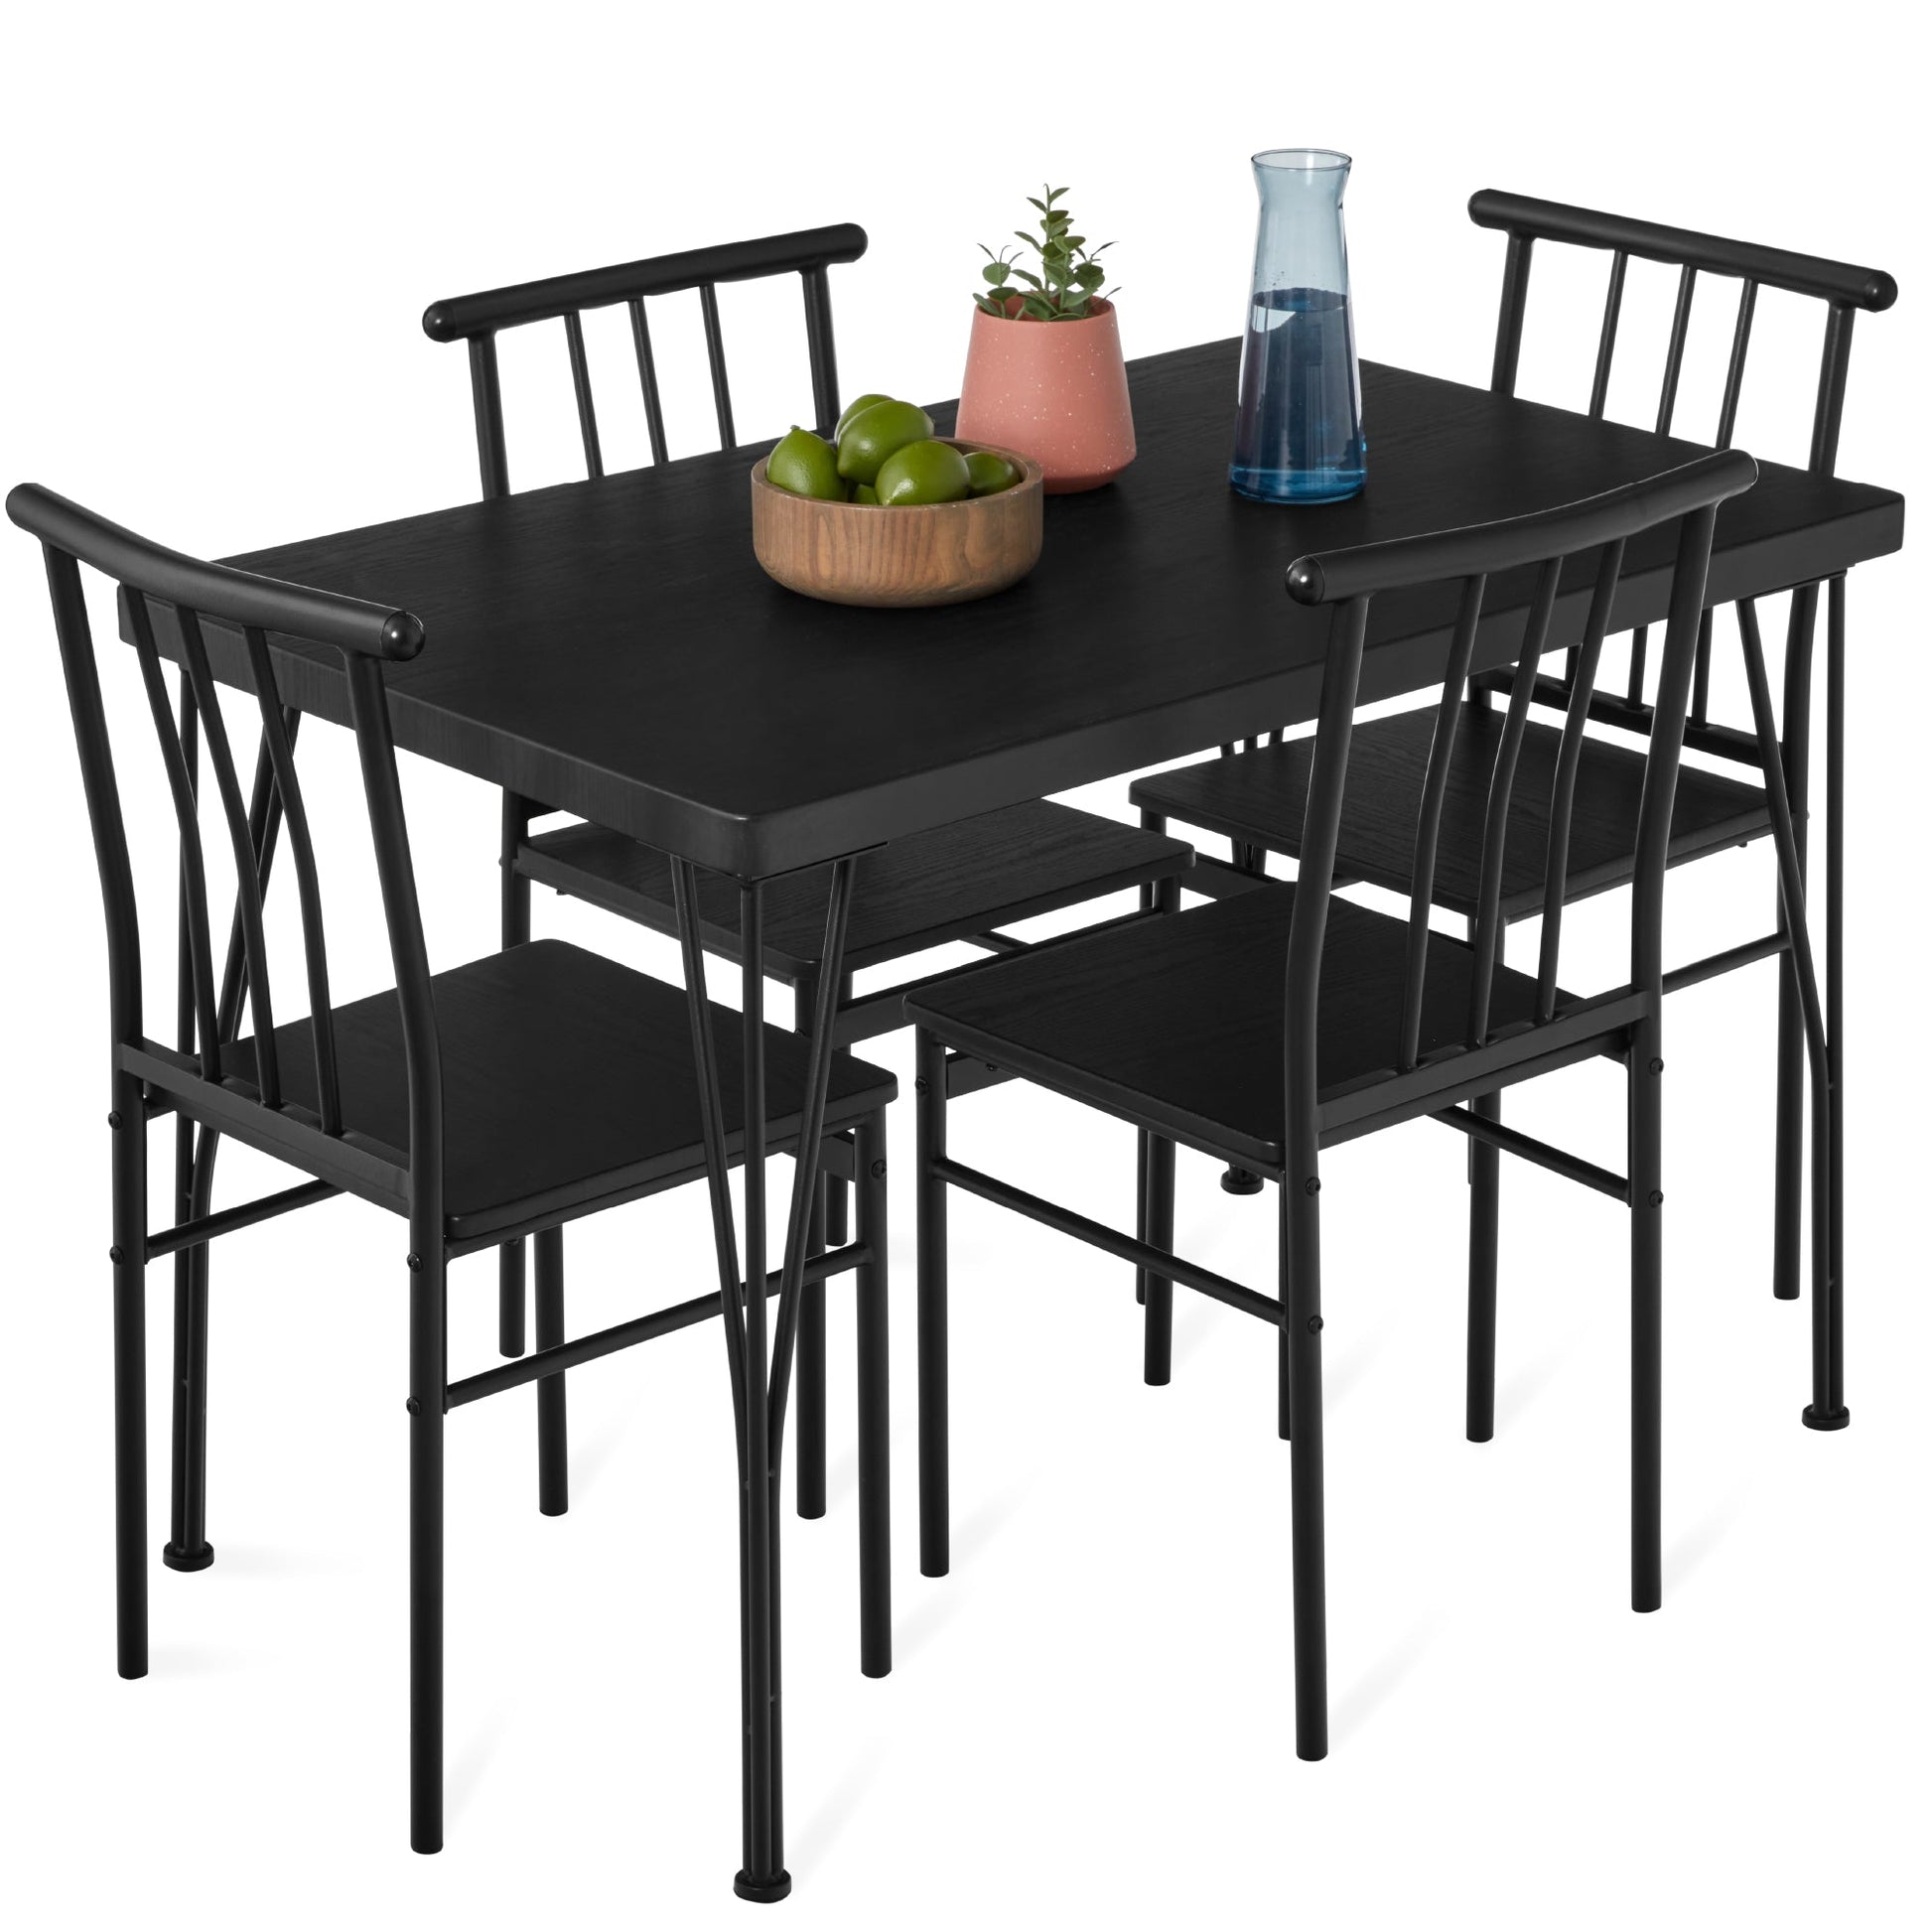 5-Piece Modern Metal and Wood Dining Table Furniture Set w/ 4 Chairs